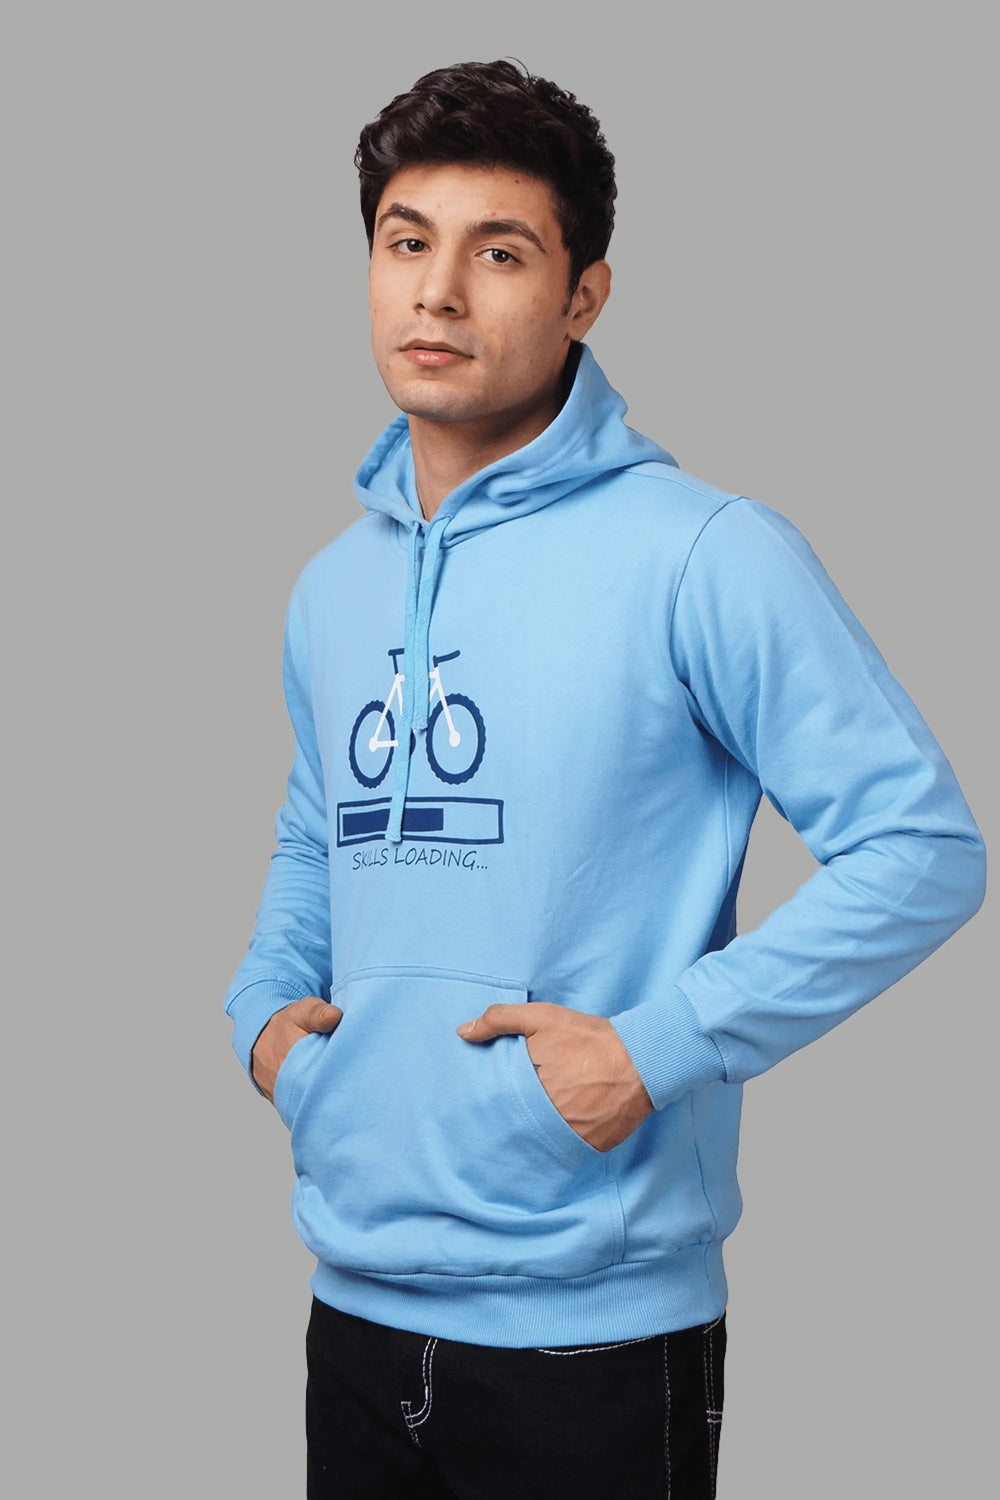 The hoodie is made with premium fabric to give you a perfect look with comfort color is elegant and beautiful styles come under a affordable range.